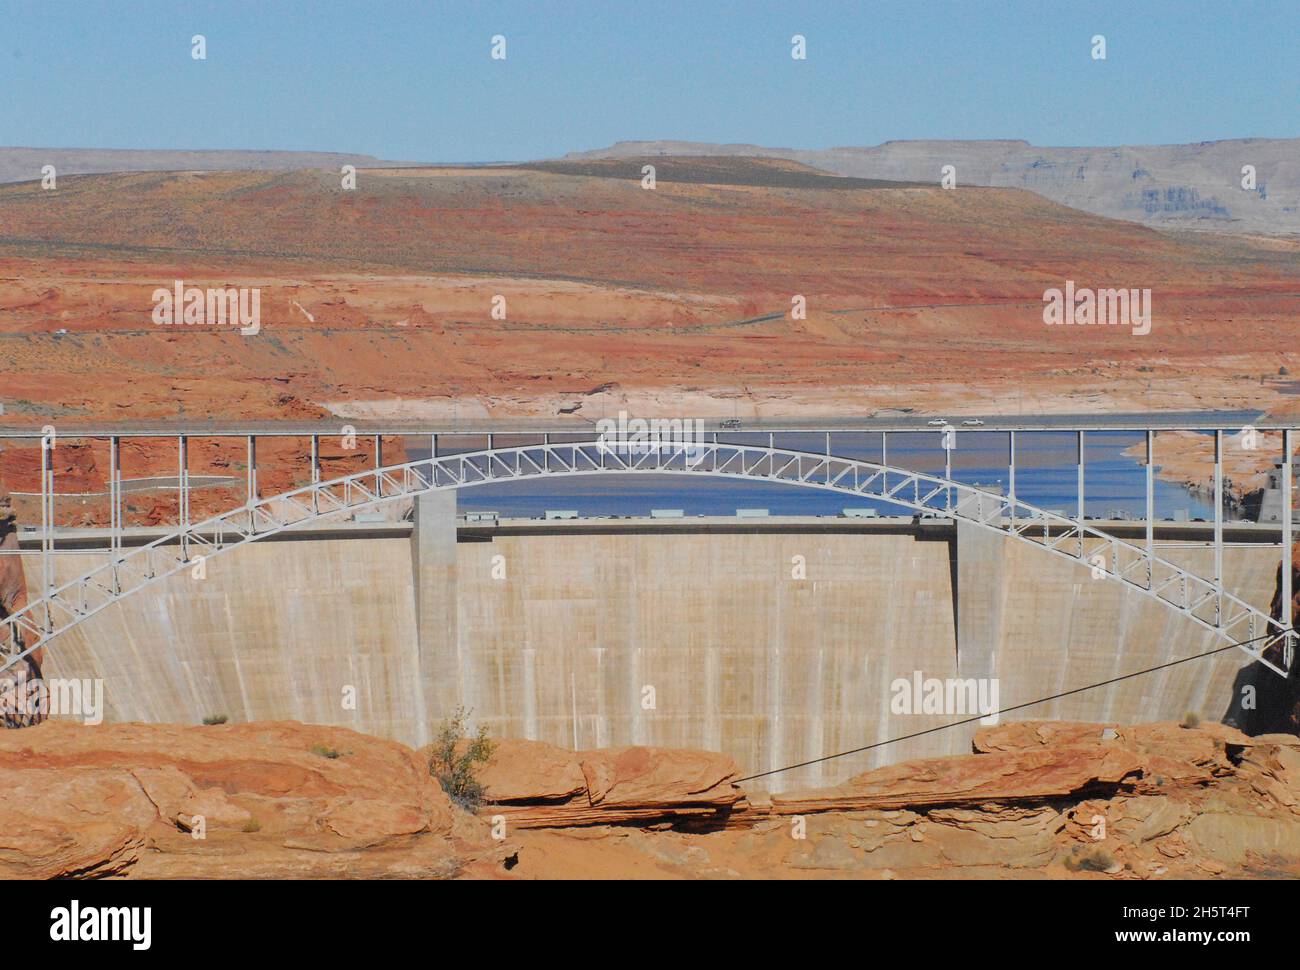 Panoramic overview of the expanse of the Glen Canyon Dam with the bridge structure, Lake Powell and surrounding red desert landscape of Page, Arizona. Stock Photo